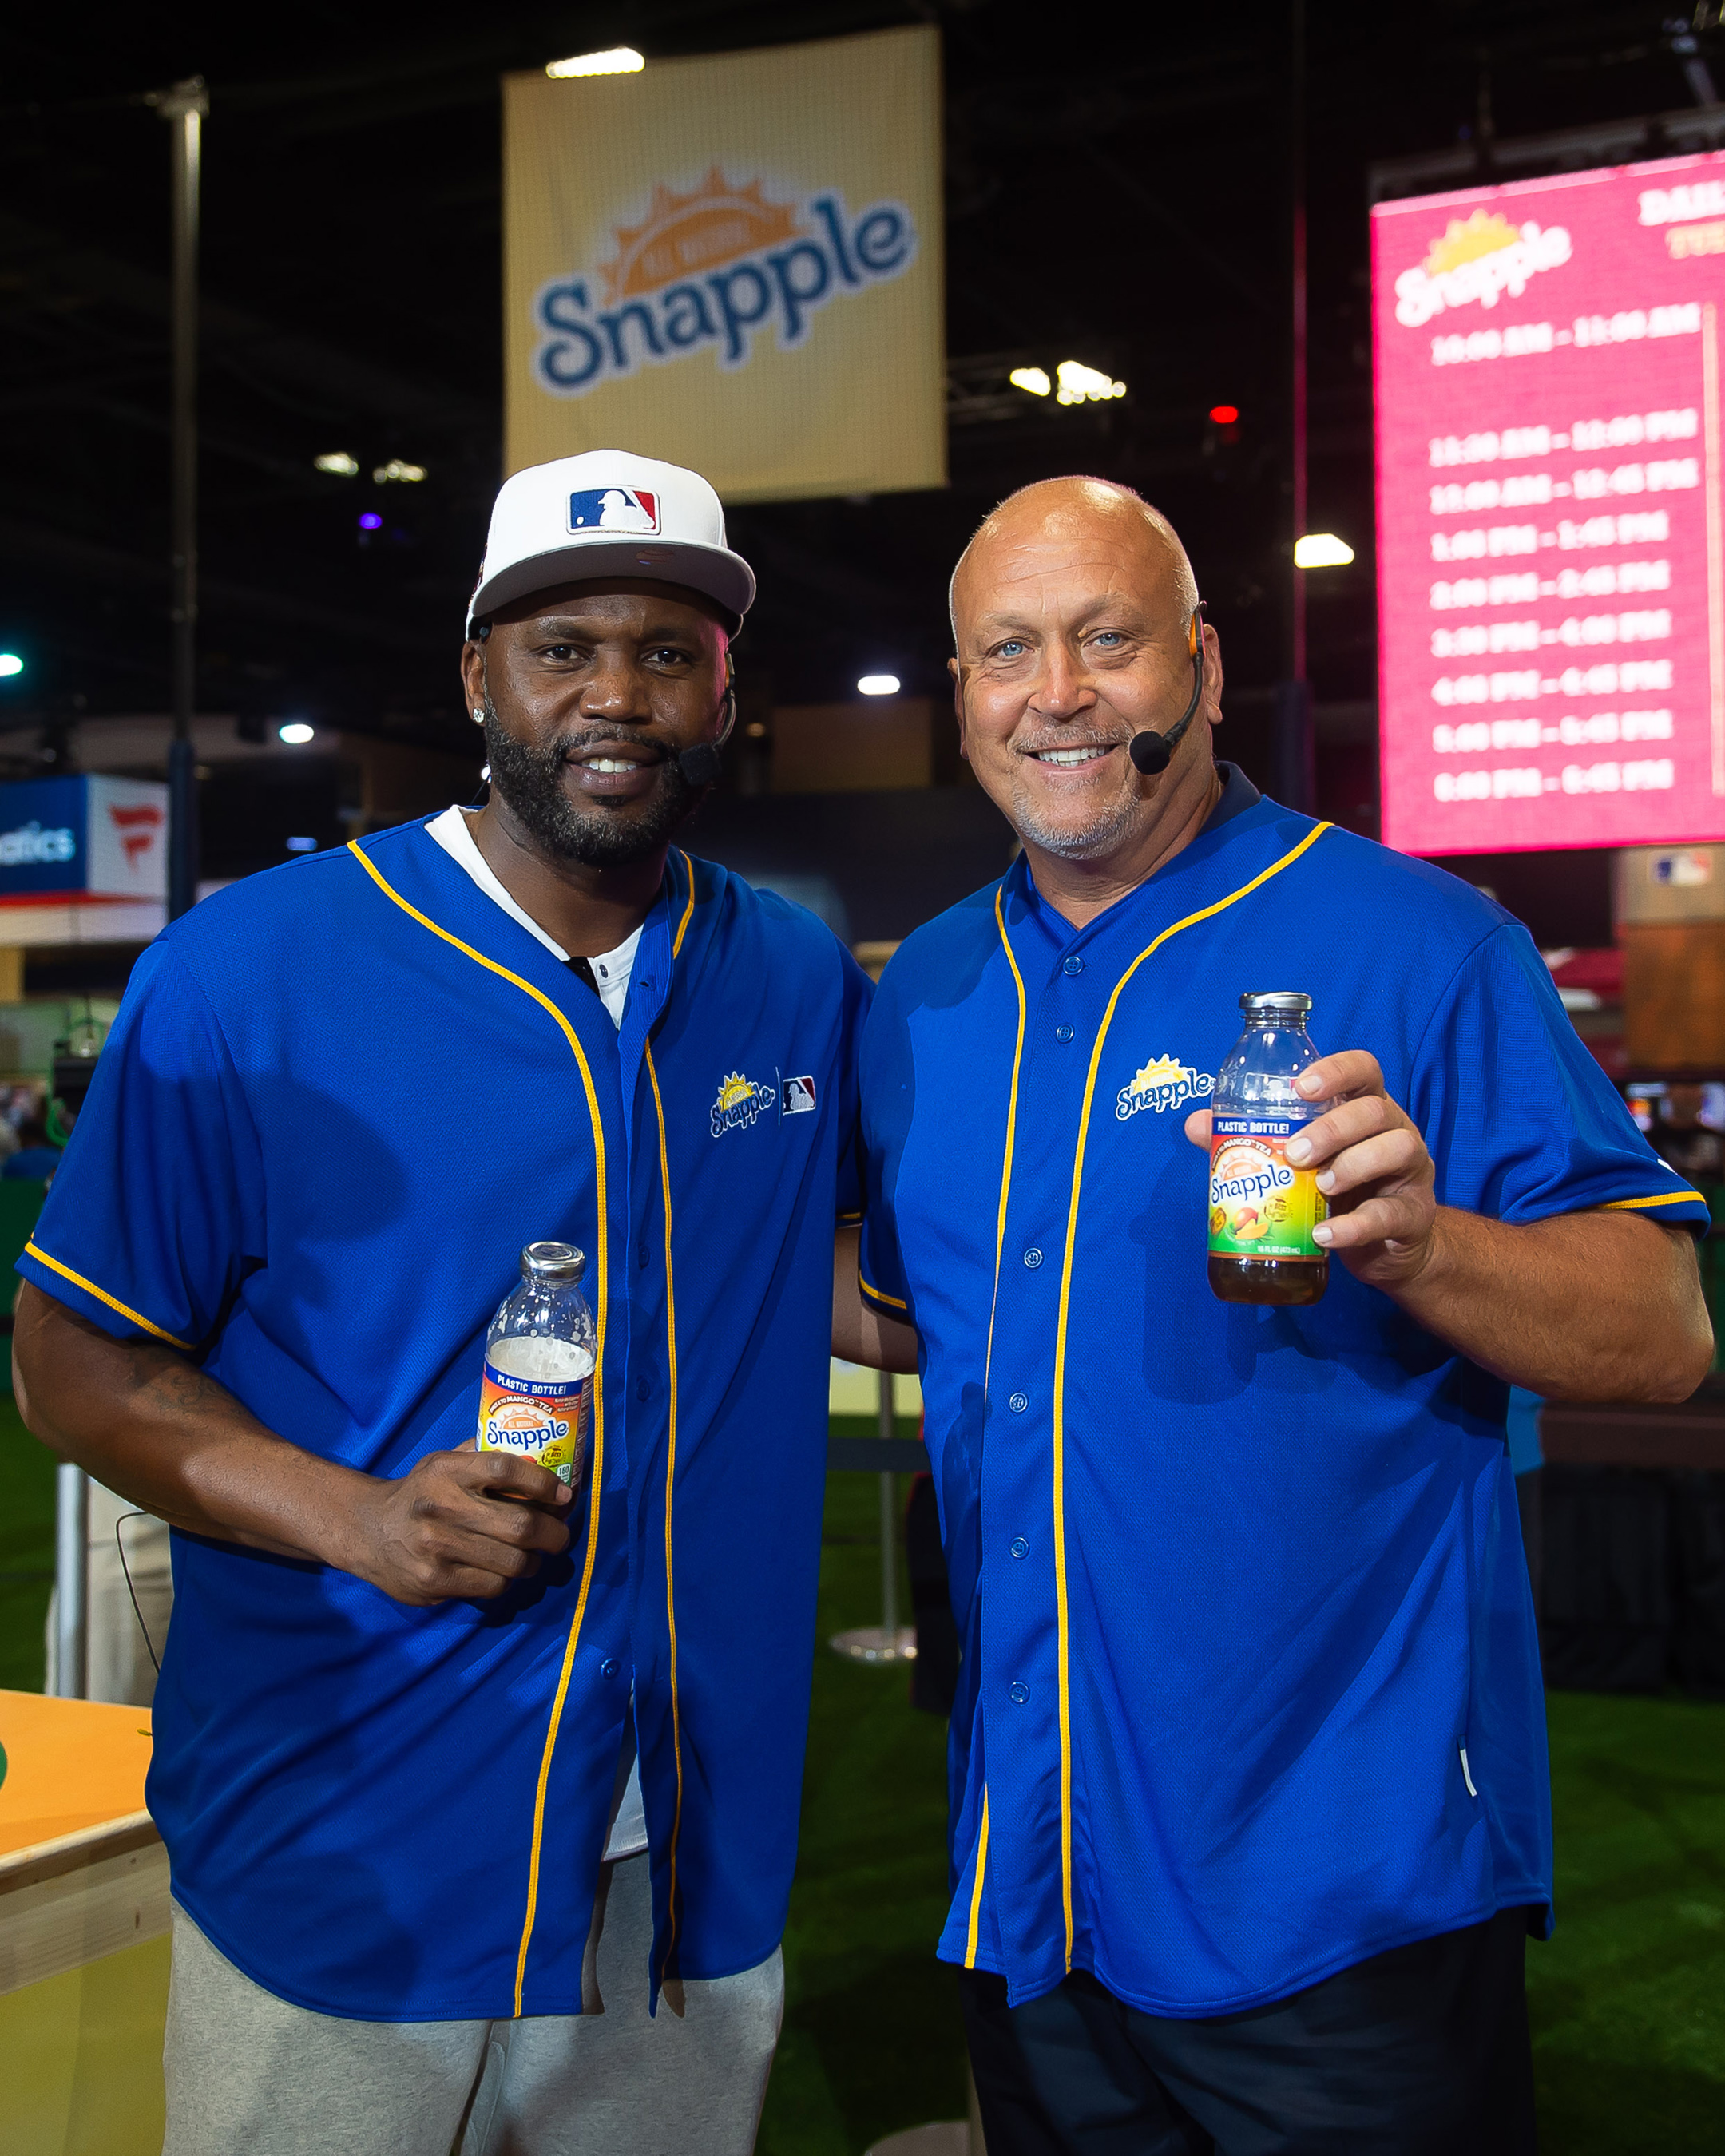 Hall of Famer Cal Ripken Jr. and World Series Champion Cliff Floyd faced off in the first-ever Snapple All-Star Bottle Flip Challenge at MLB FanFest. Cliff Floyd was crowned 